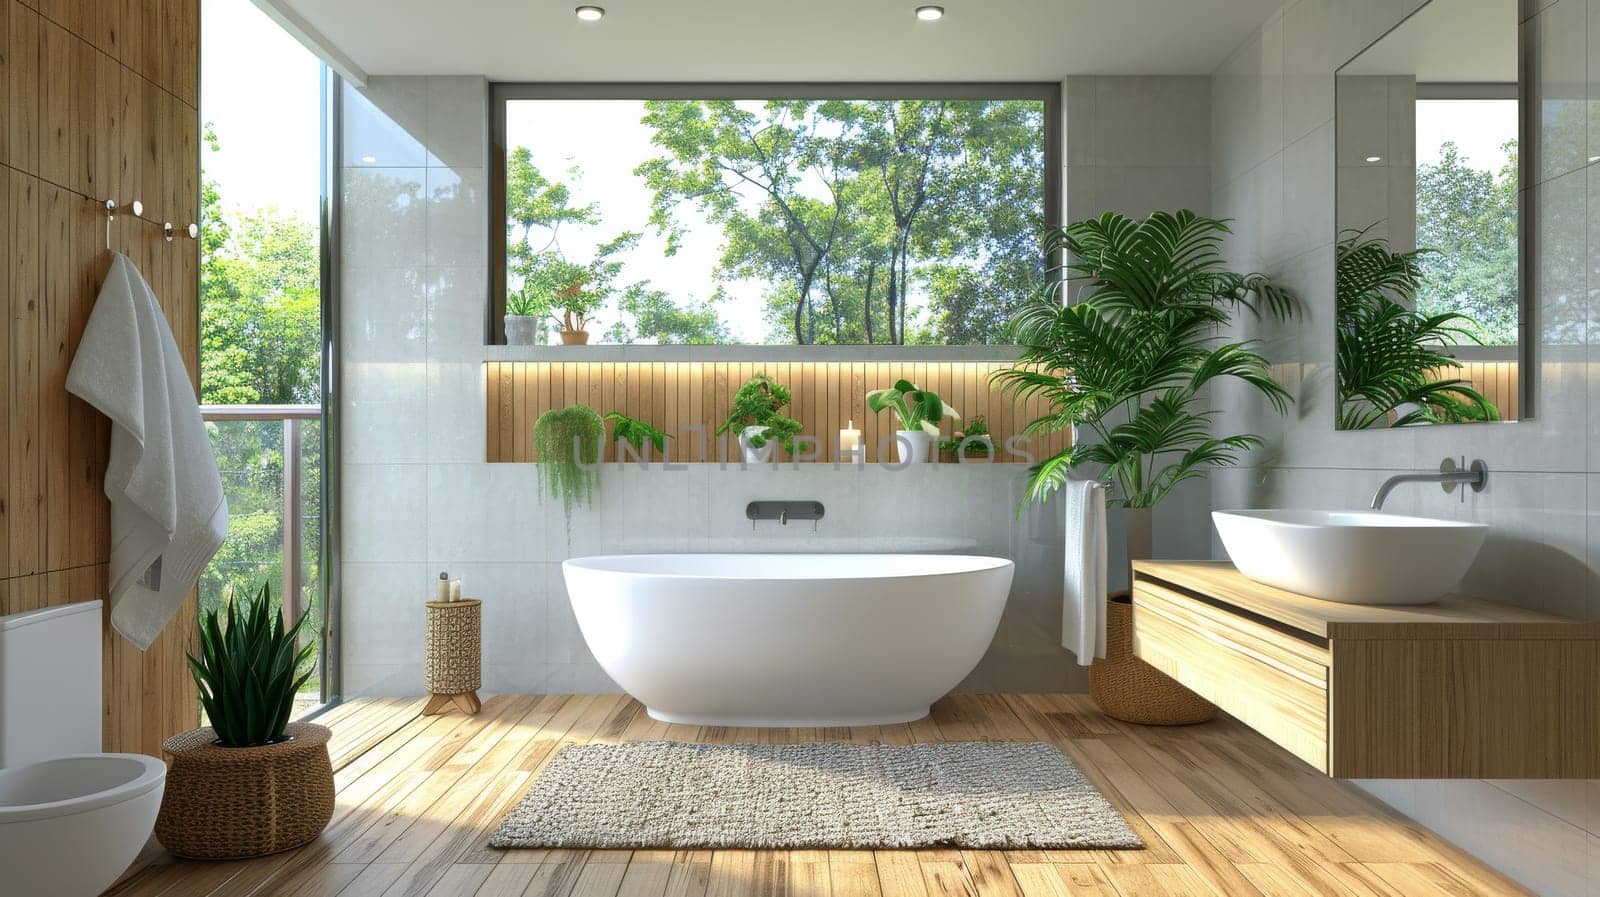 A bathroom with a large white bathtub and a wooden floor. The bathroom is decorated with a rug and a basket